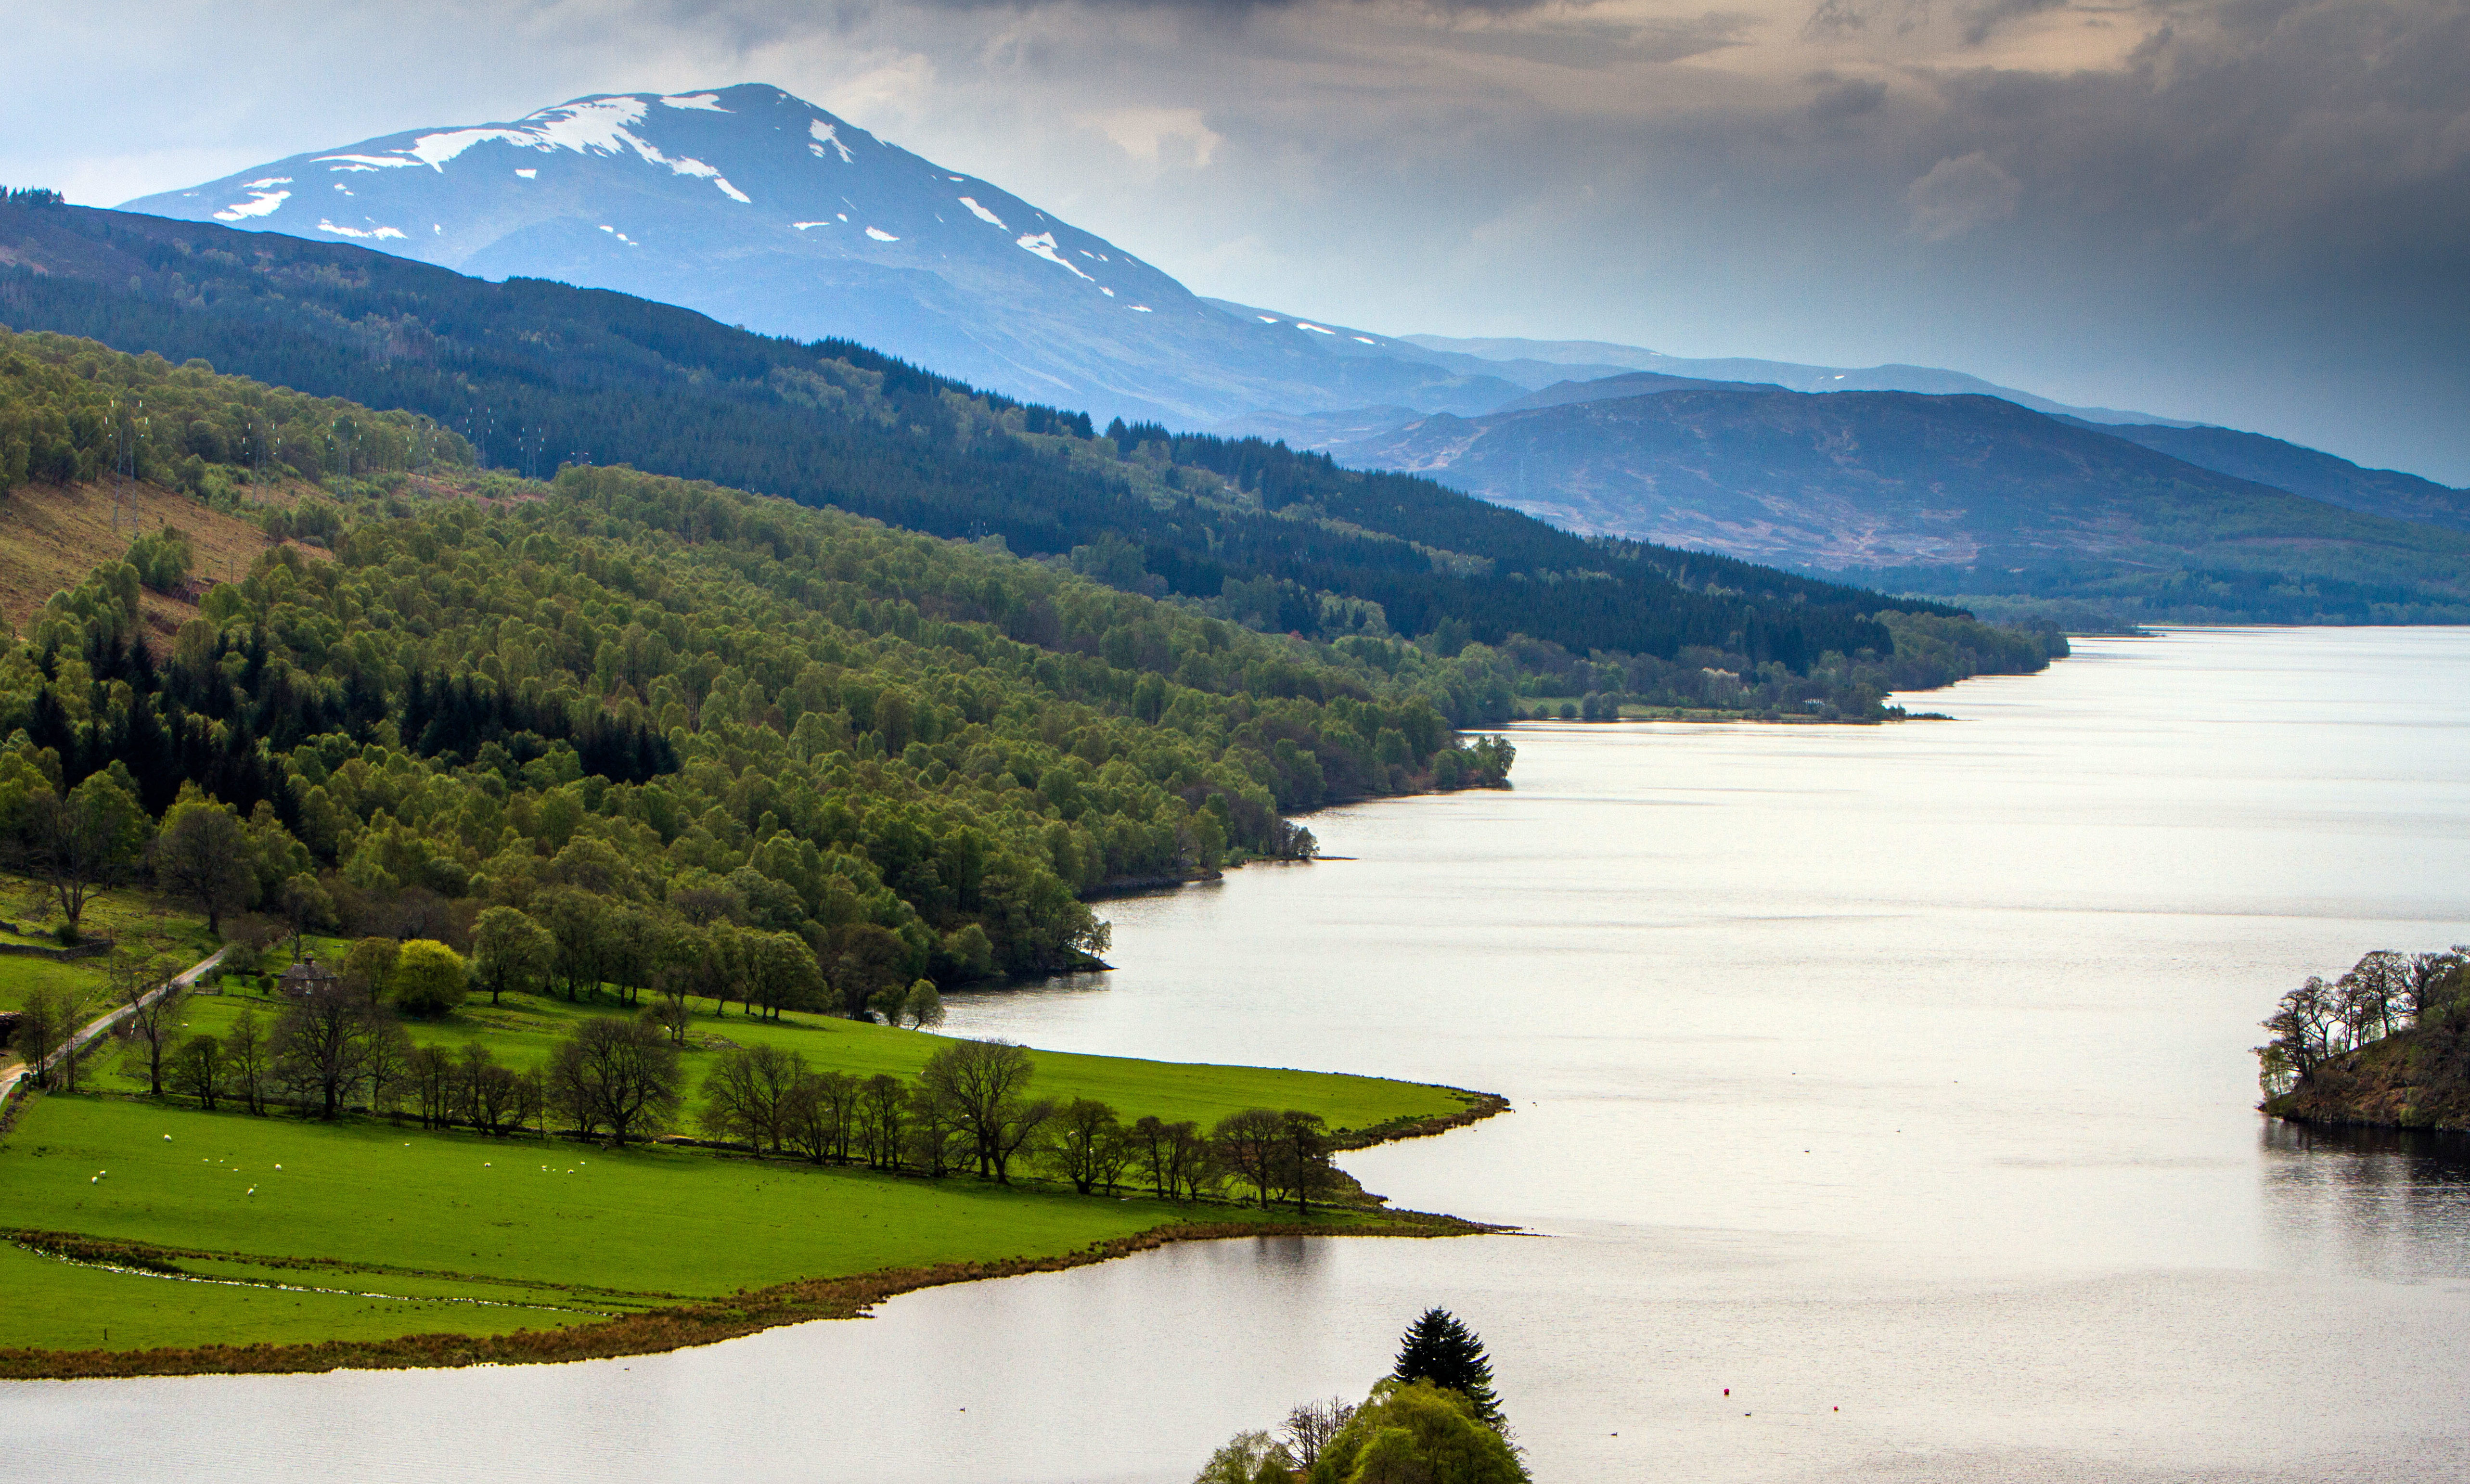 The view of Loch Tummel surrounded by part of the Tay Forest Park and Schiehallion in the background.